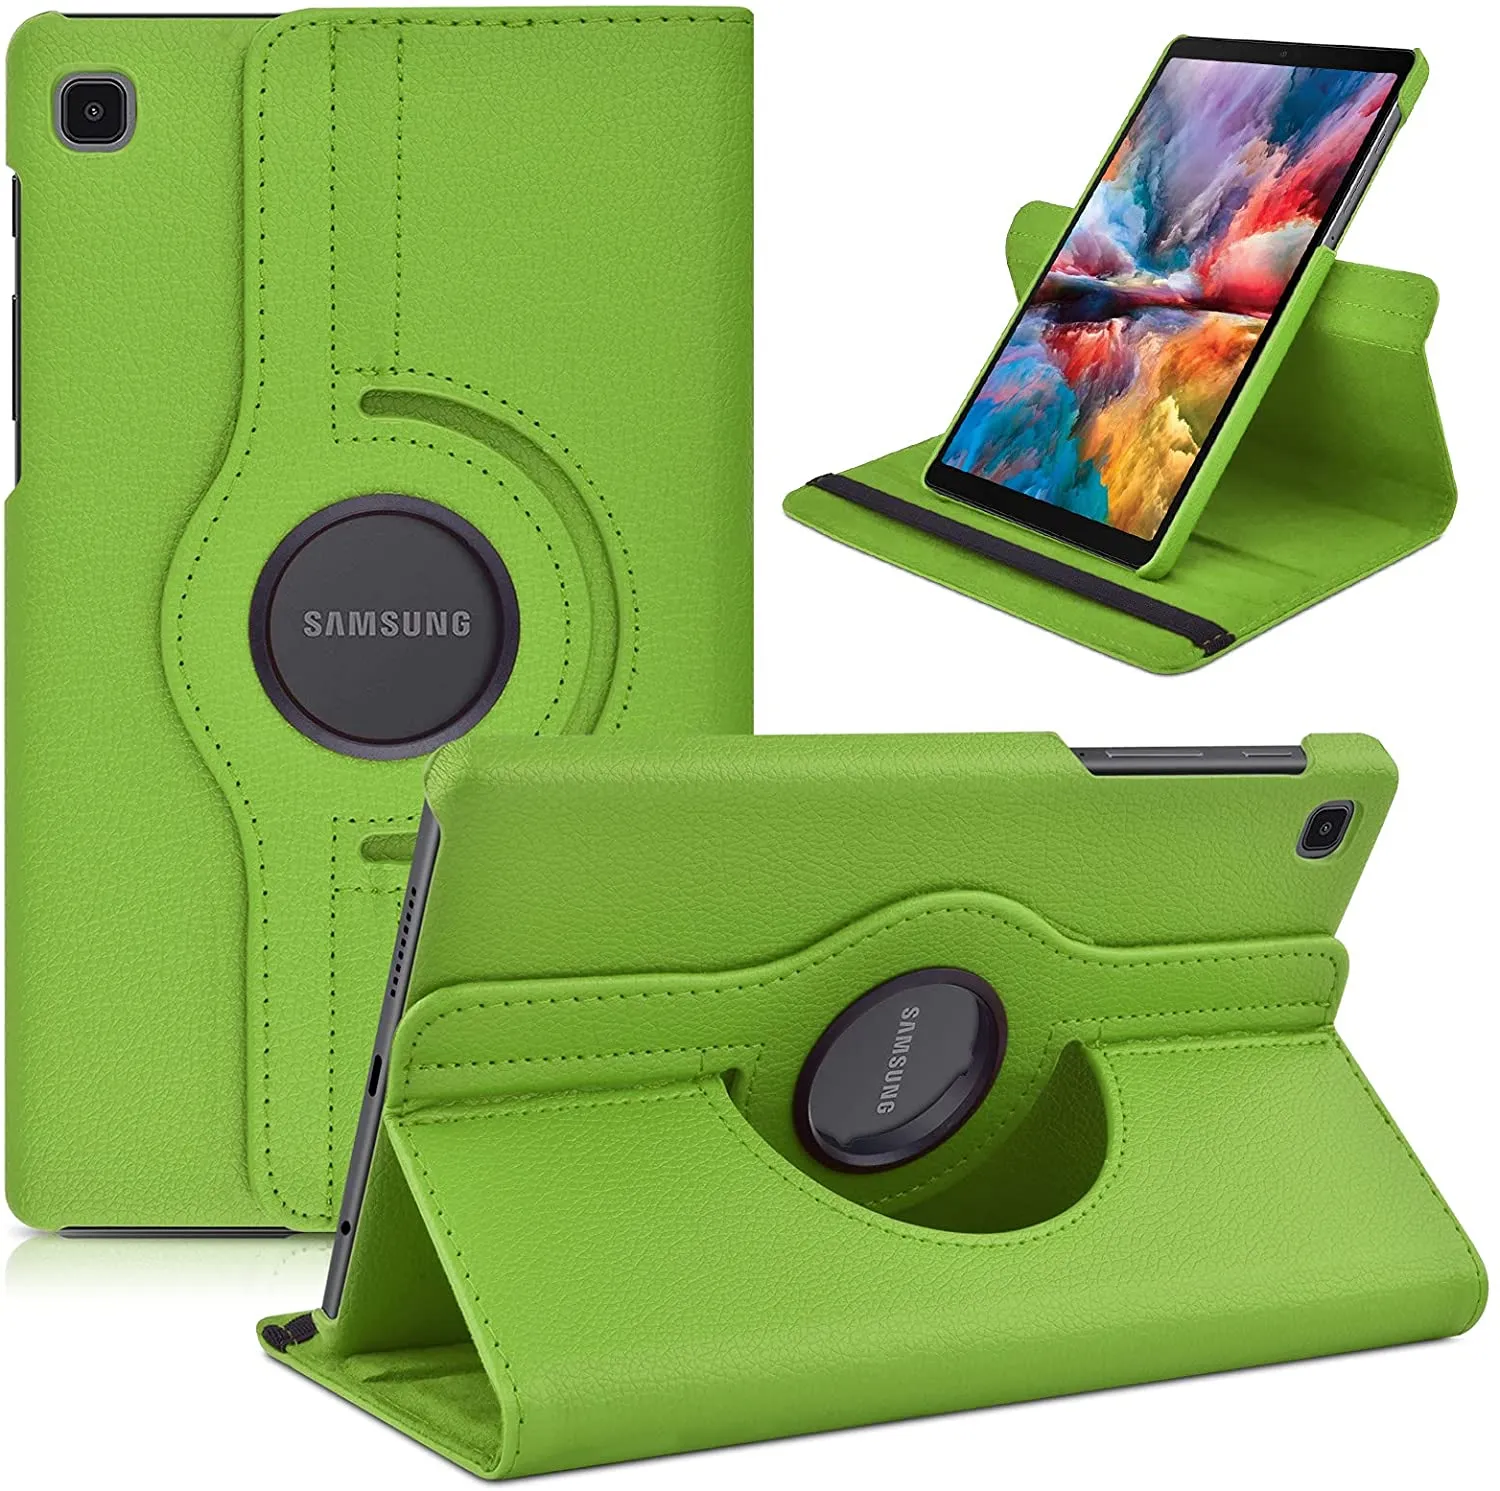 For Huawei MatePad Pro 10.8 12.6 11 inch Full Body 360 Rotating Adjustable Kickstand PU Leather folio wallet Tablet Case Cover